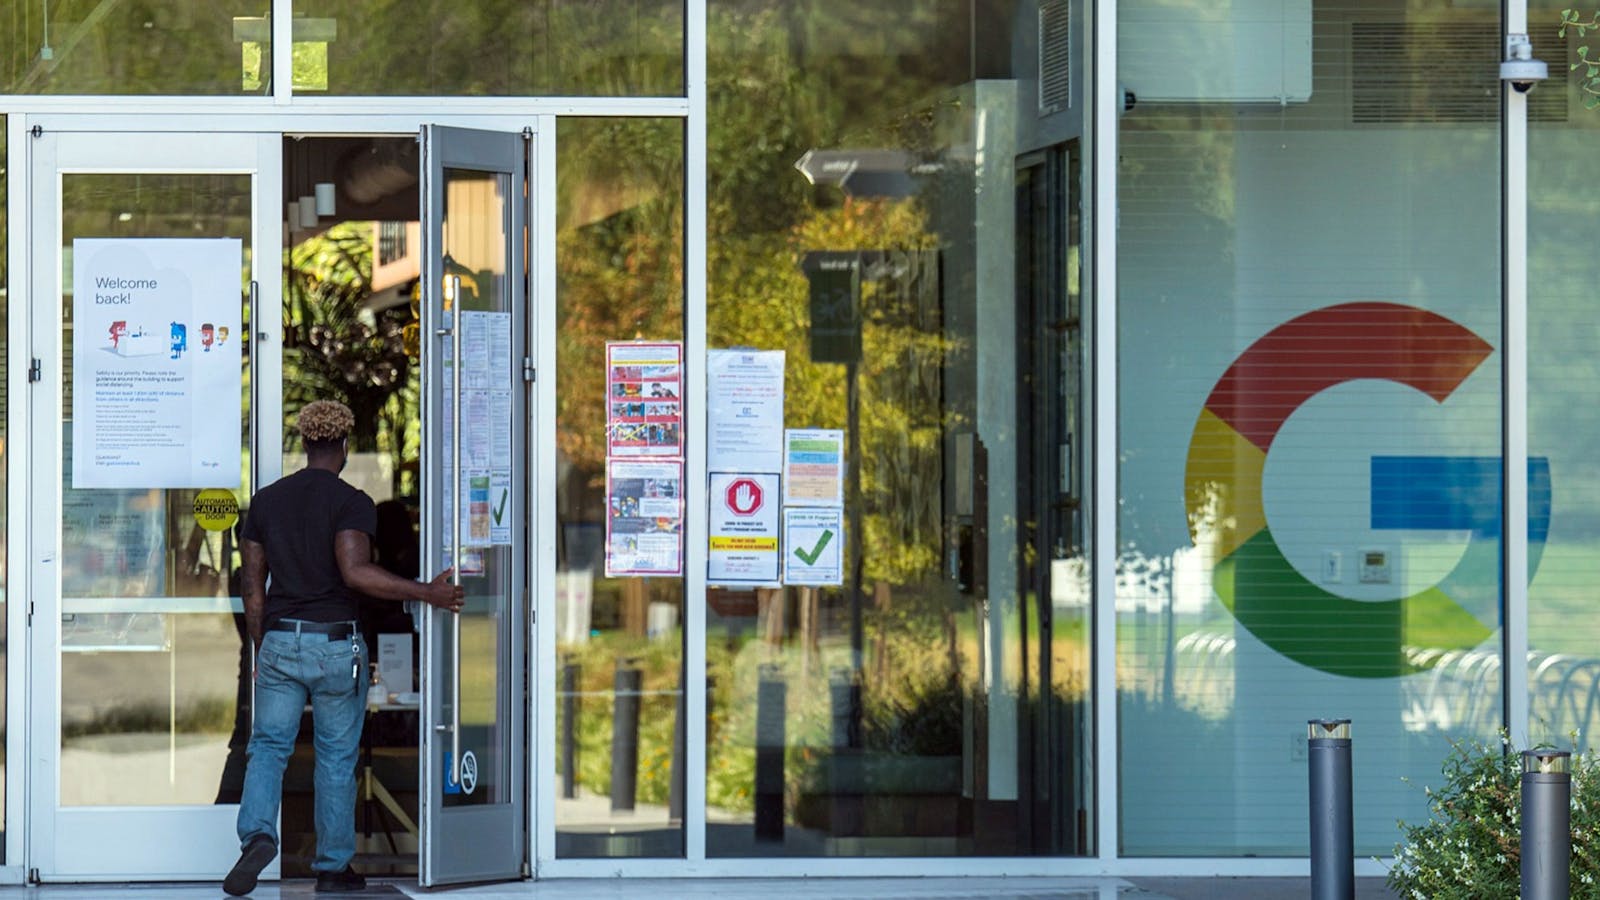 A person walks into a building at the Google campus in Mountain View, California, on Monday, July 27, 2020. Photo by Bloomberg